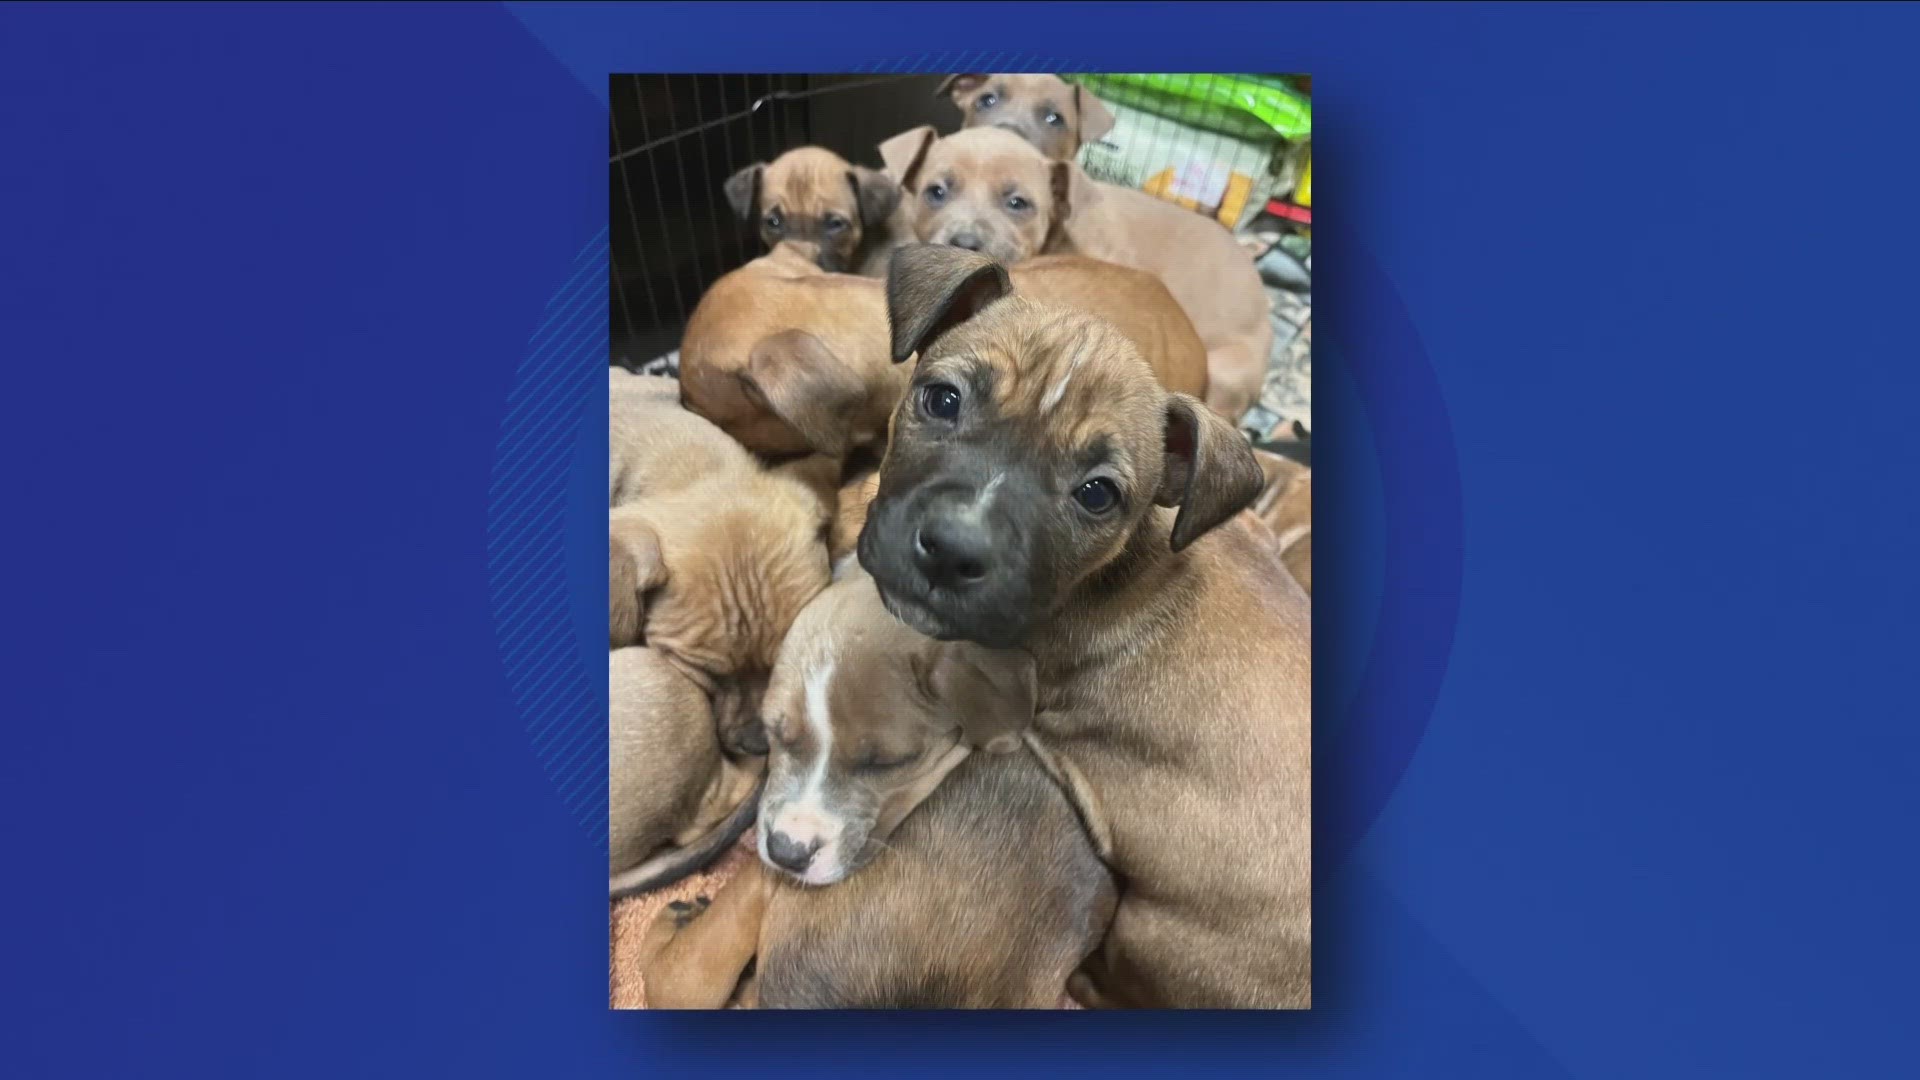 A woman saw 2 pet carriers on Thursday night in Leon, and inside were 13 puppies and an adult male dog.